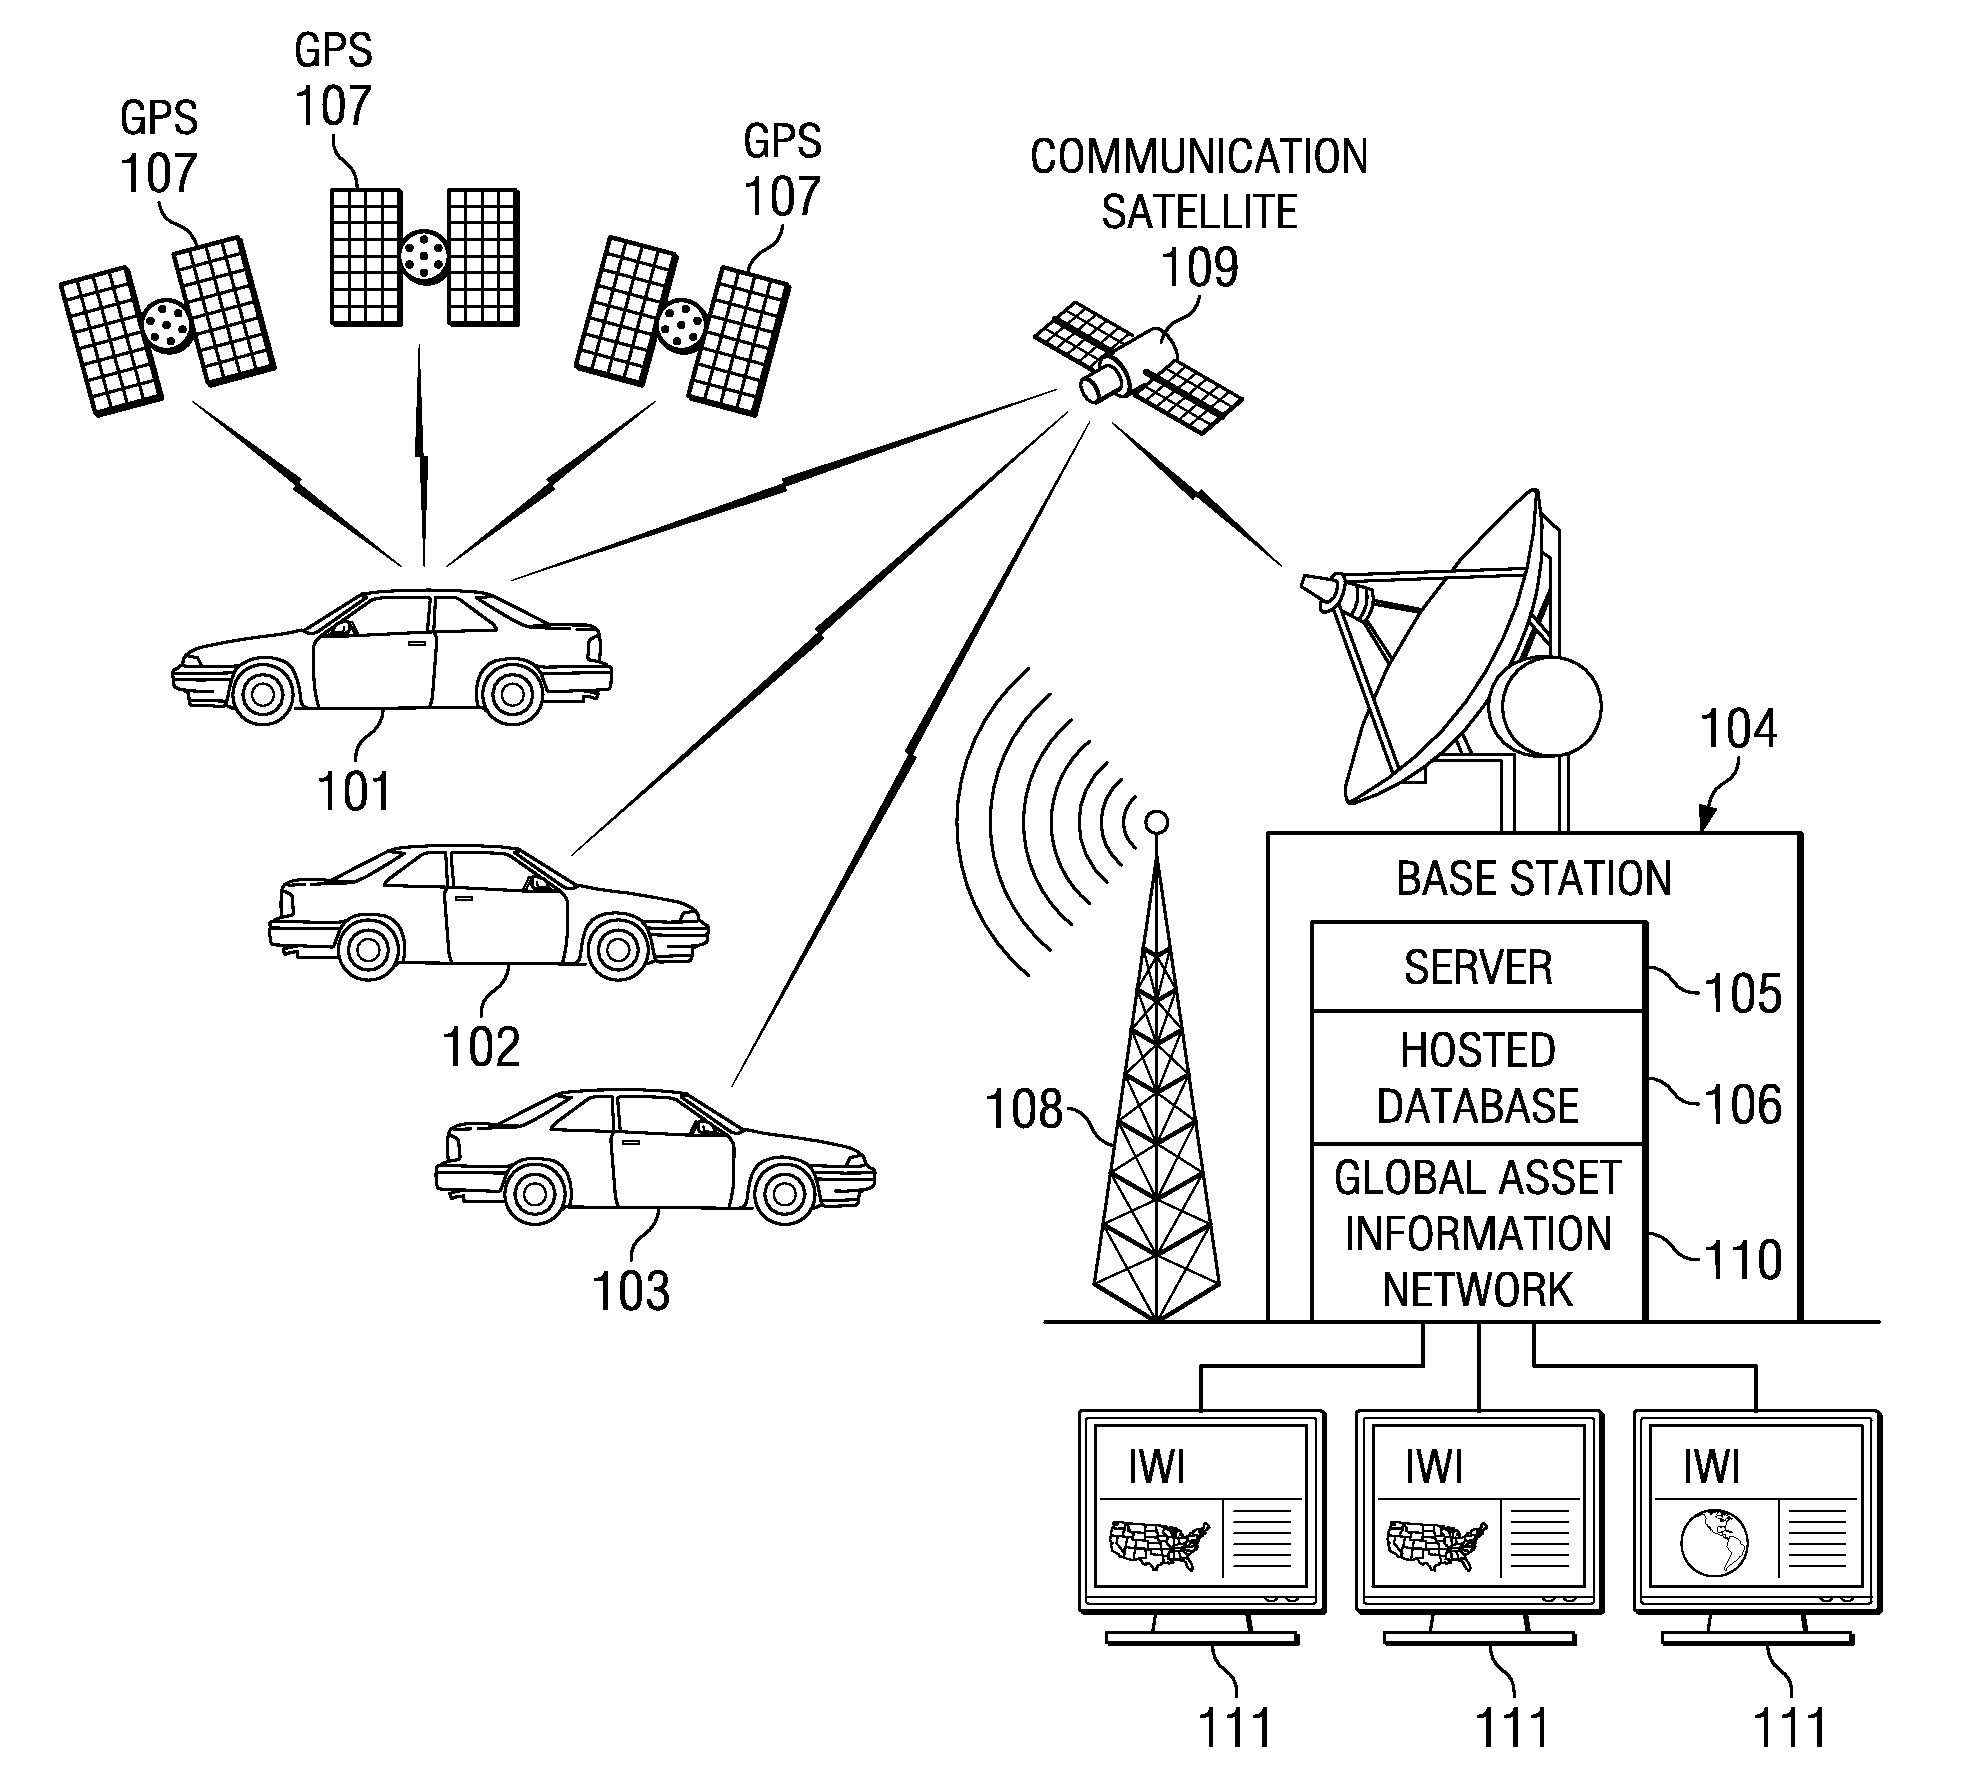 System and method for monitoring and updating speed-by-street data